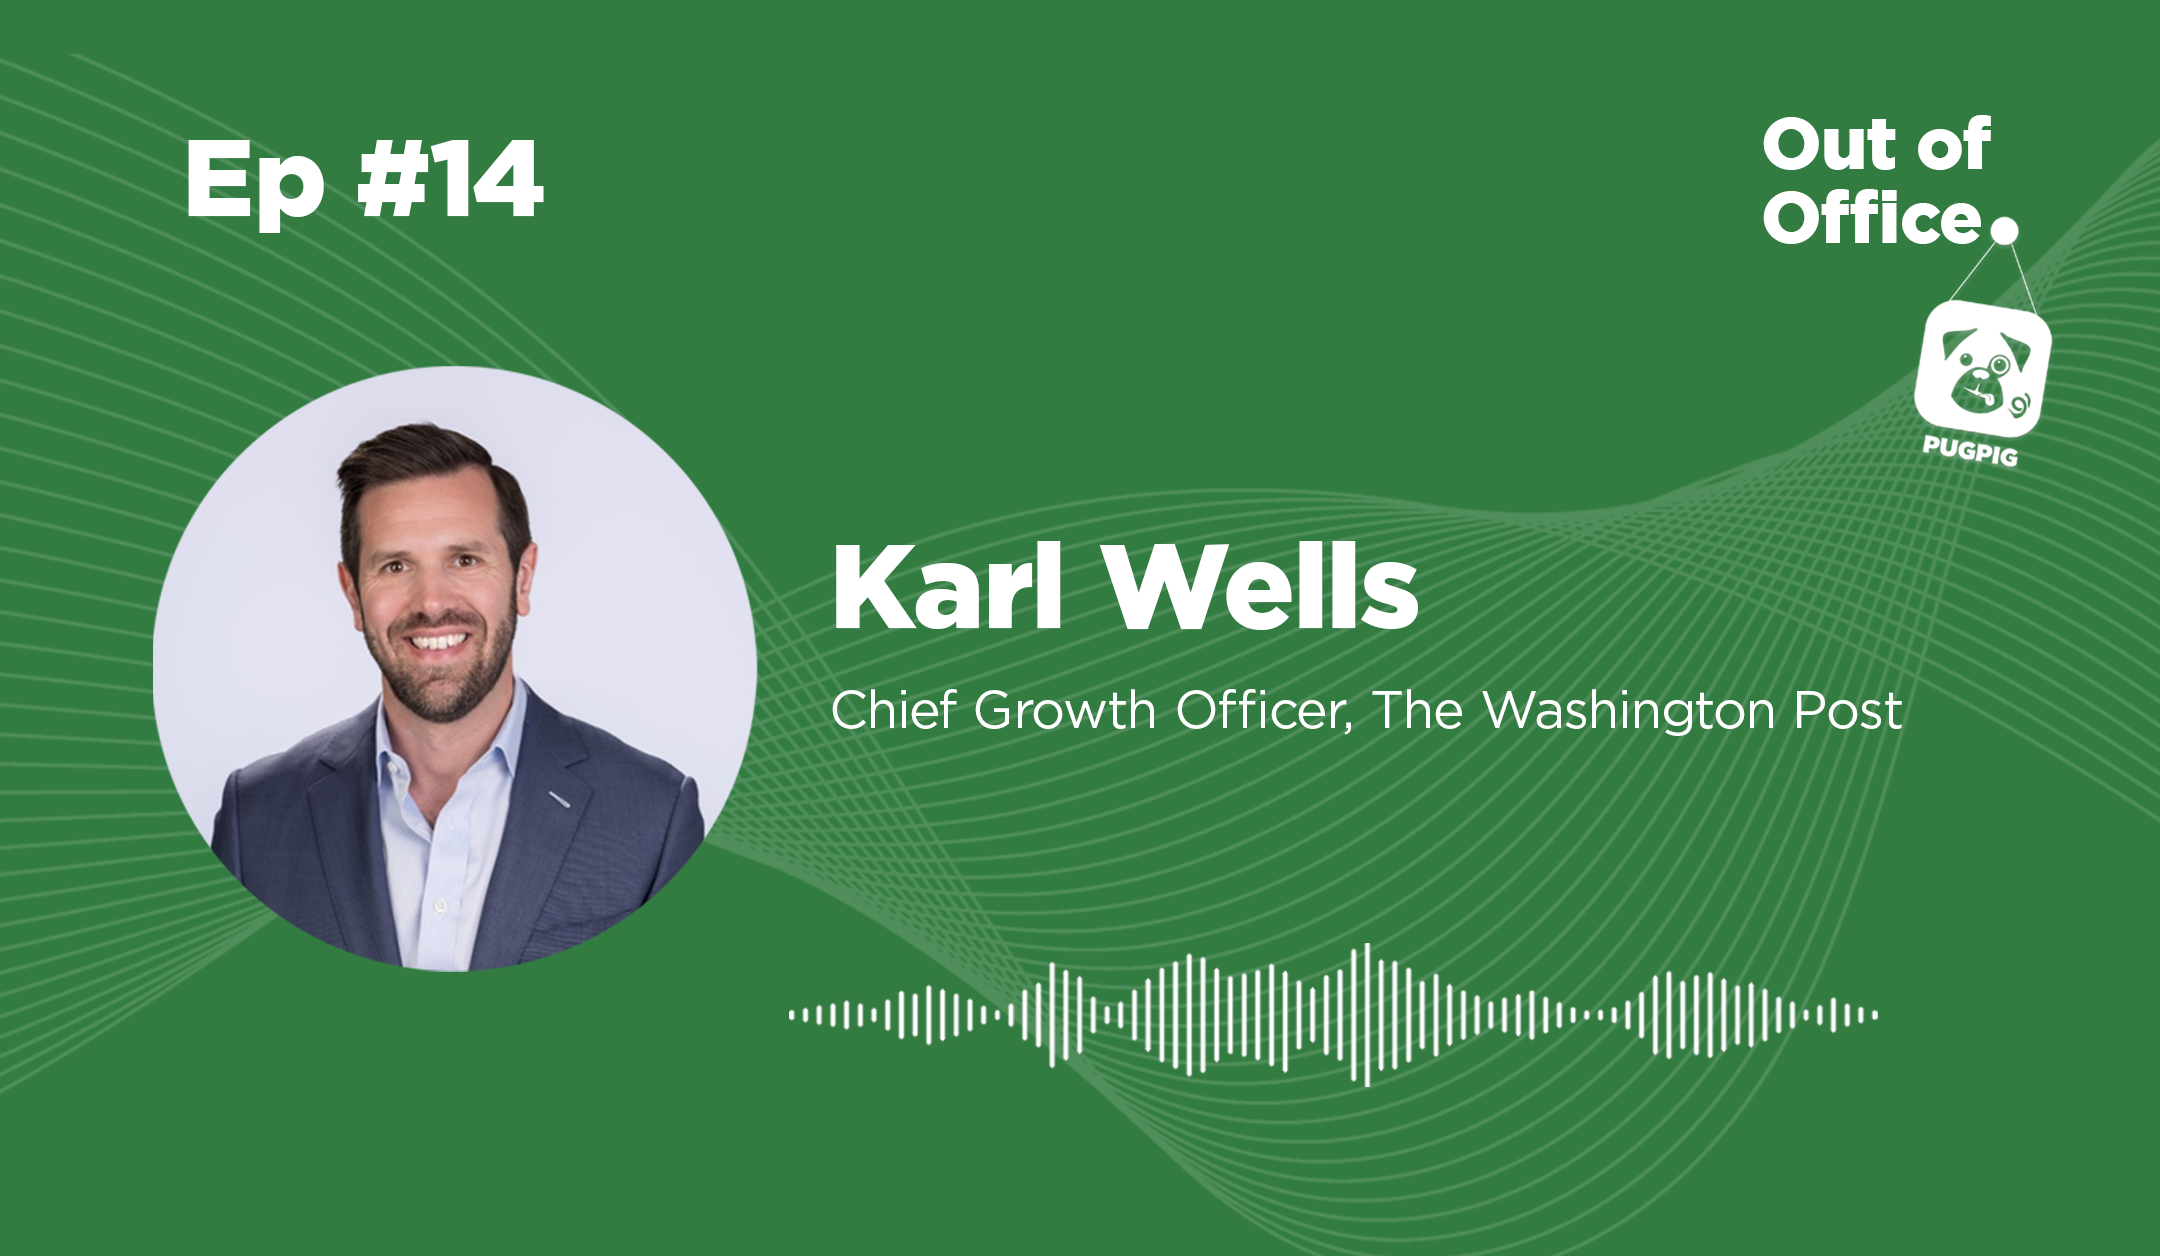 Karl Wells, Out of Office podcast